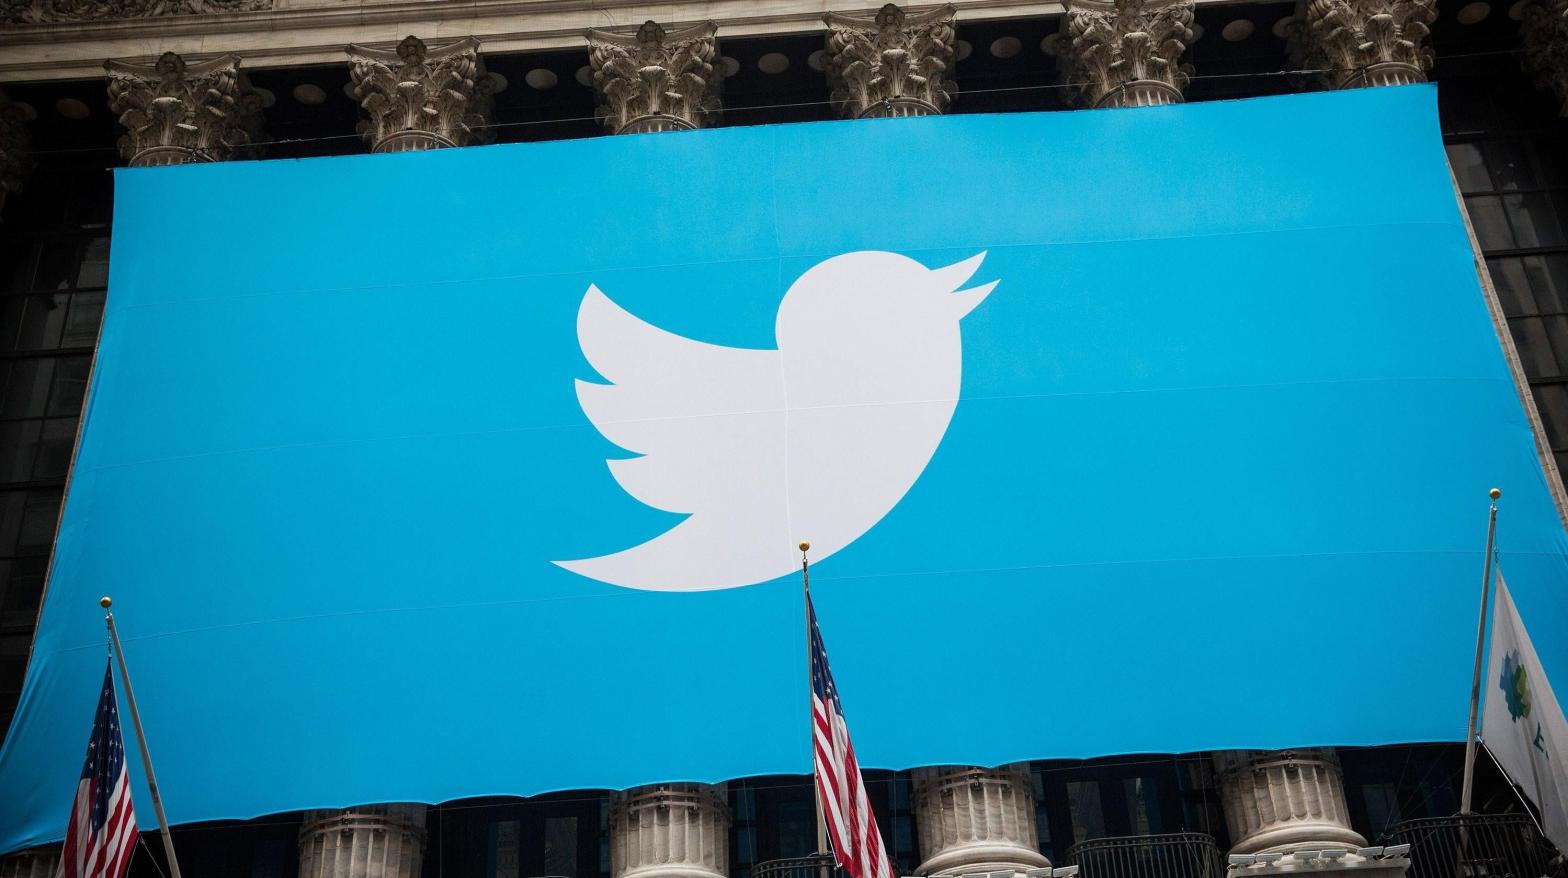 Twitter Blue went live in June 2021. (Image: Andrew Burton, Getty Images)